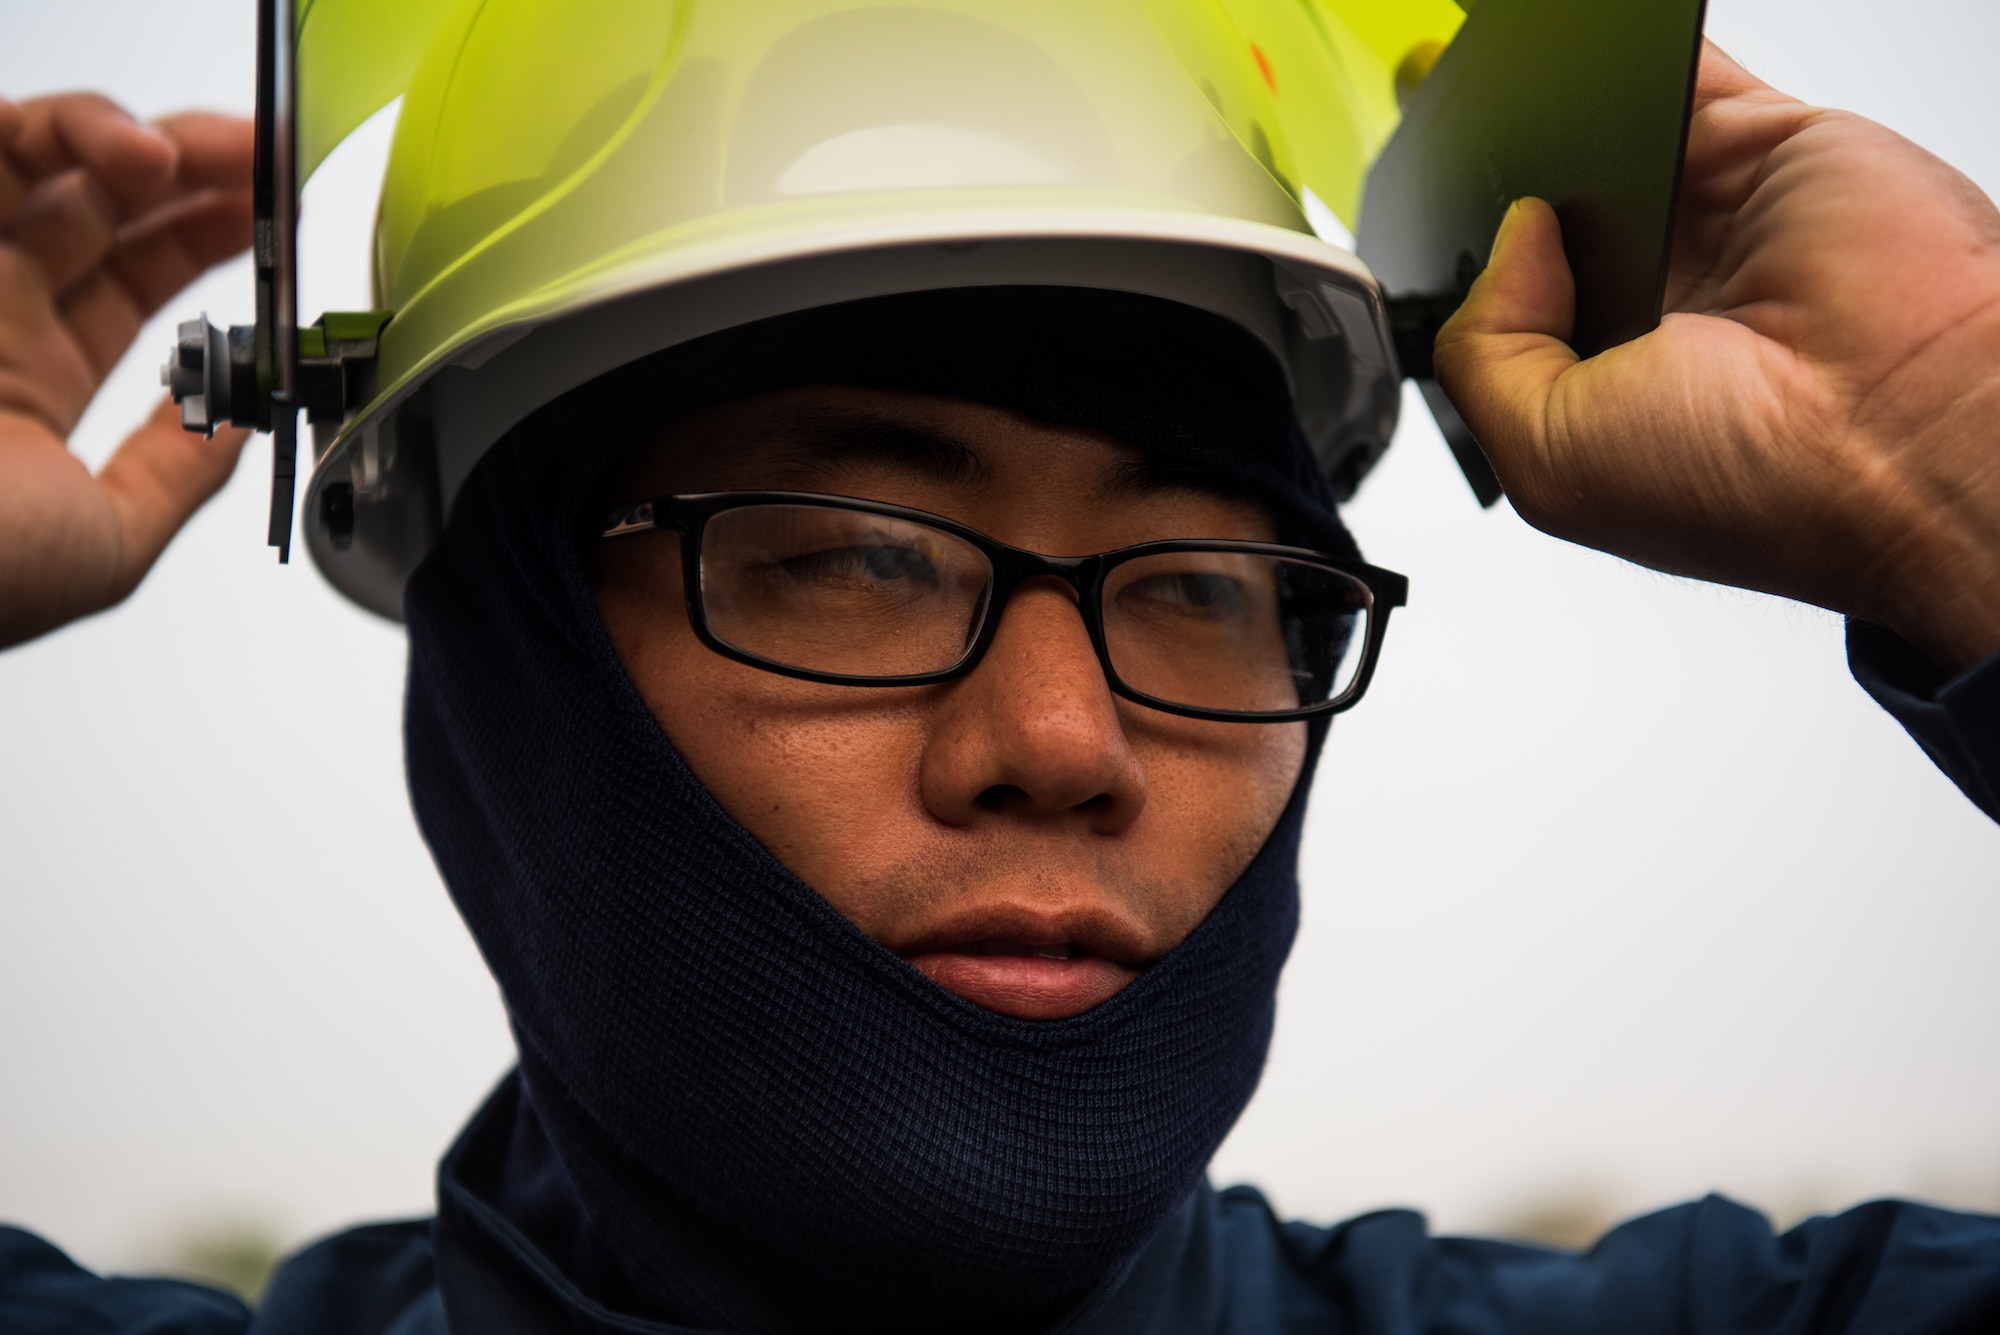 Airman 1st Class Charles Song, 9th Civil Engineer Squadron heating, ventilation and air conditioning technician, secures his personal protective equipment before working with high voltage equipment at  Beale Air Force Base, California, Aug. 2, 2018. Arch flash gear is rated to protect the wearer if there is an electric explosion. (U.S. photo by Senior Airman Justin Parsons)